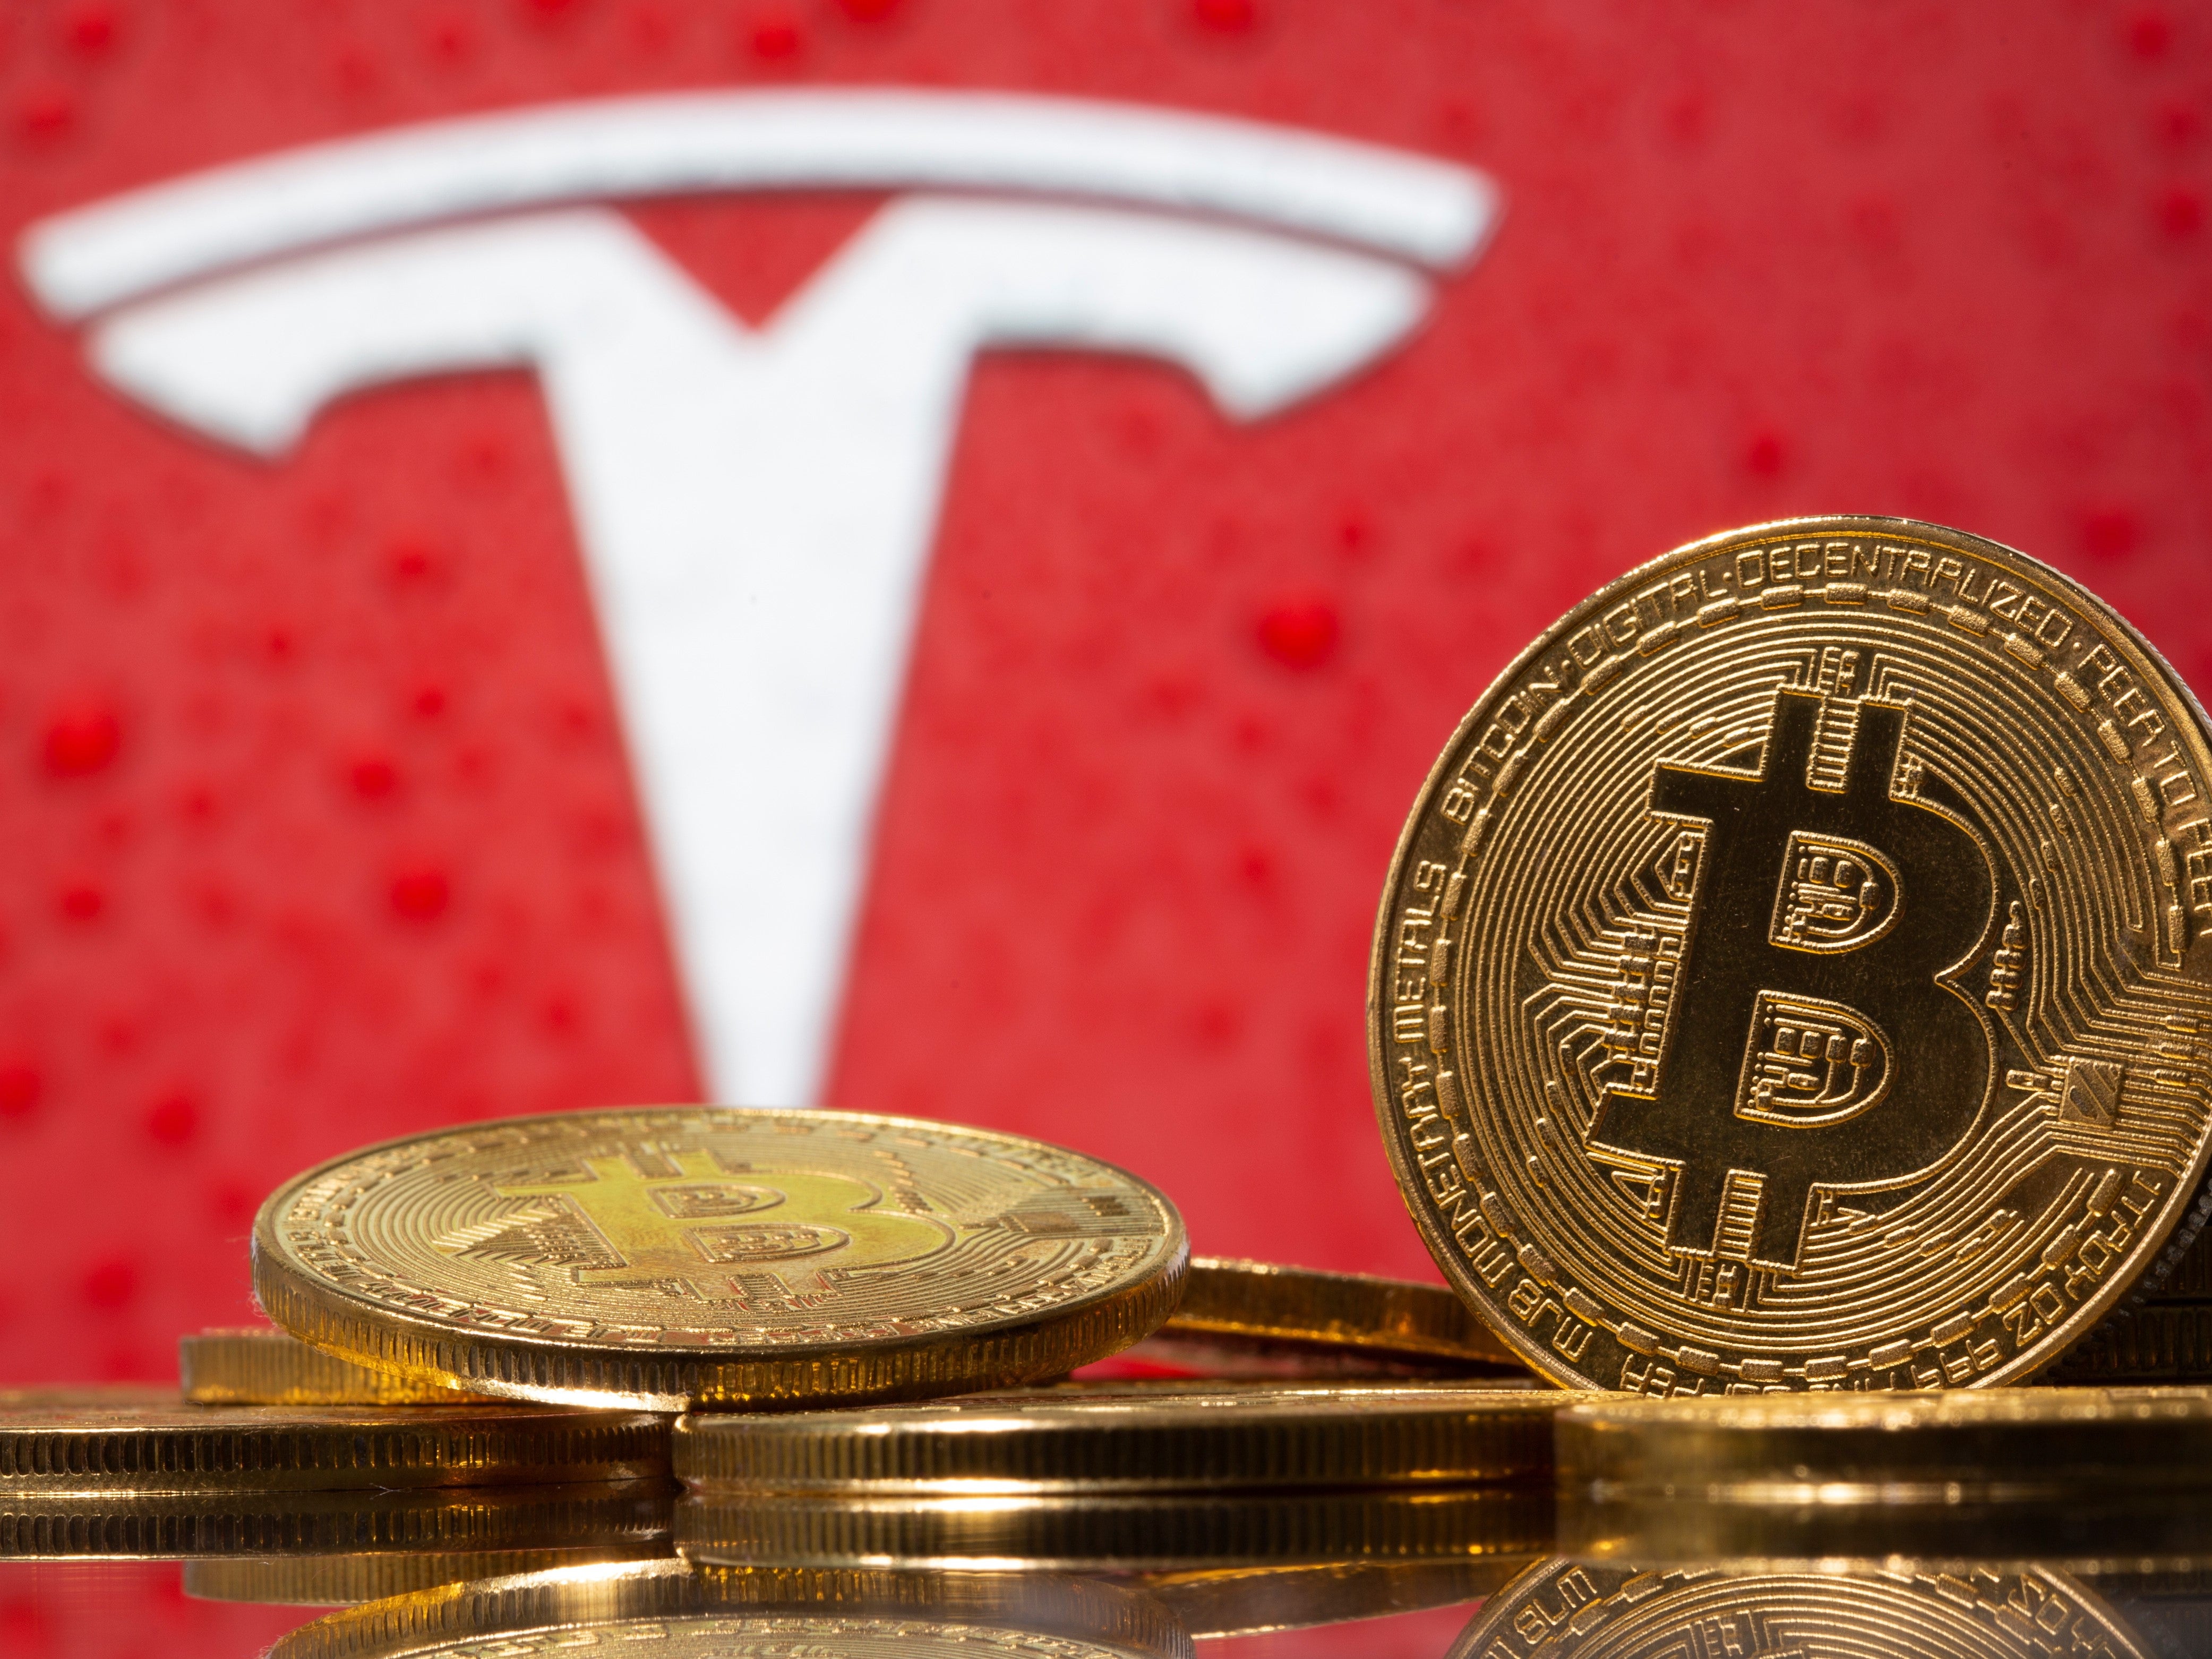 Bitcoin’s price shot up by 14 per cent in the space of a few minutes after Tesla announced its $1.5bn investment in the cryptocurrency